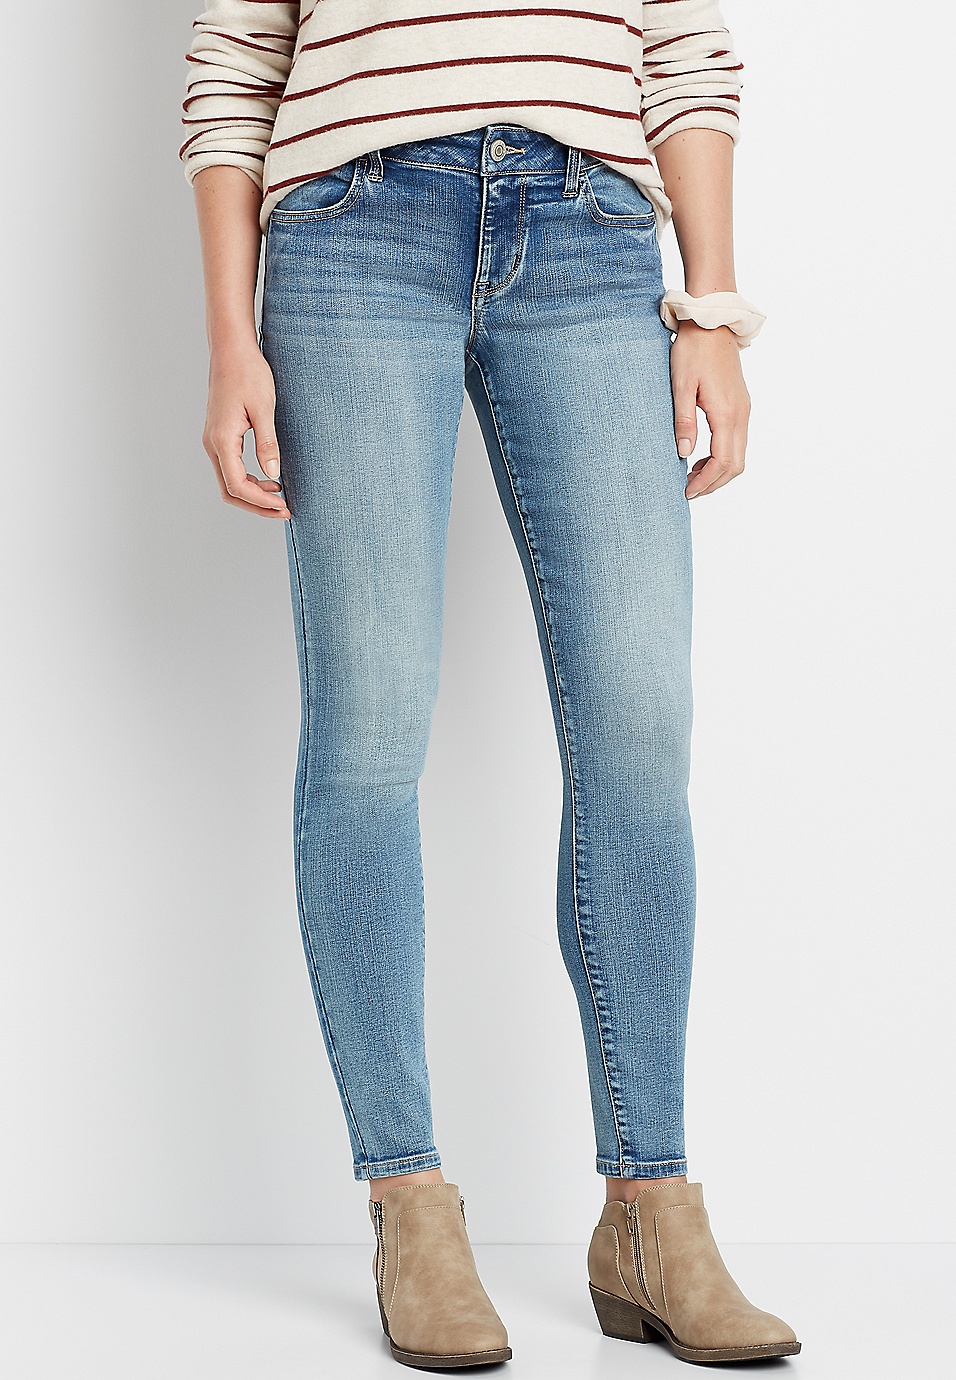 m jeans by maurices™ Mid Rise Jegging | maurices